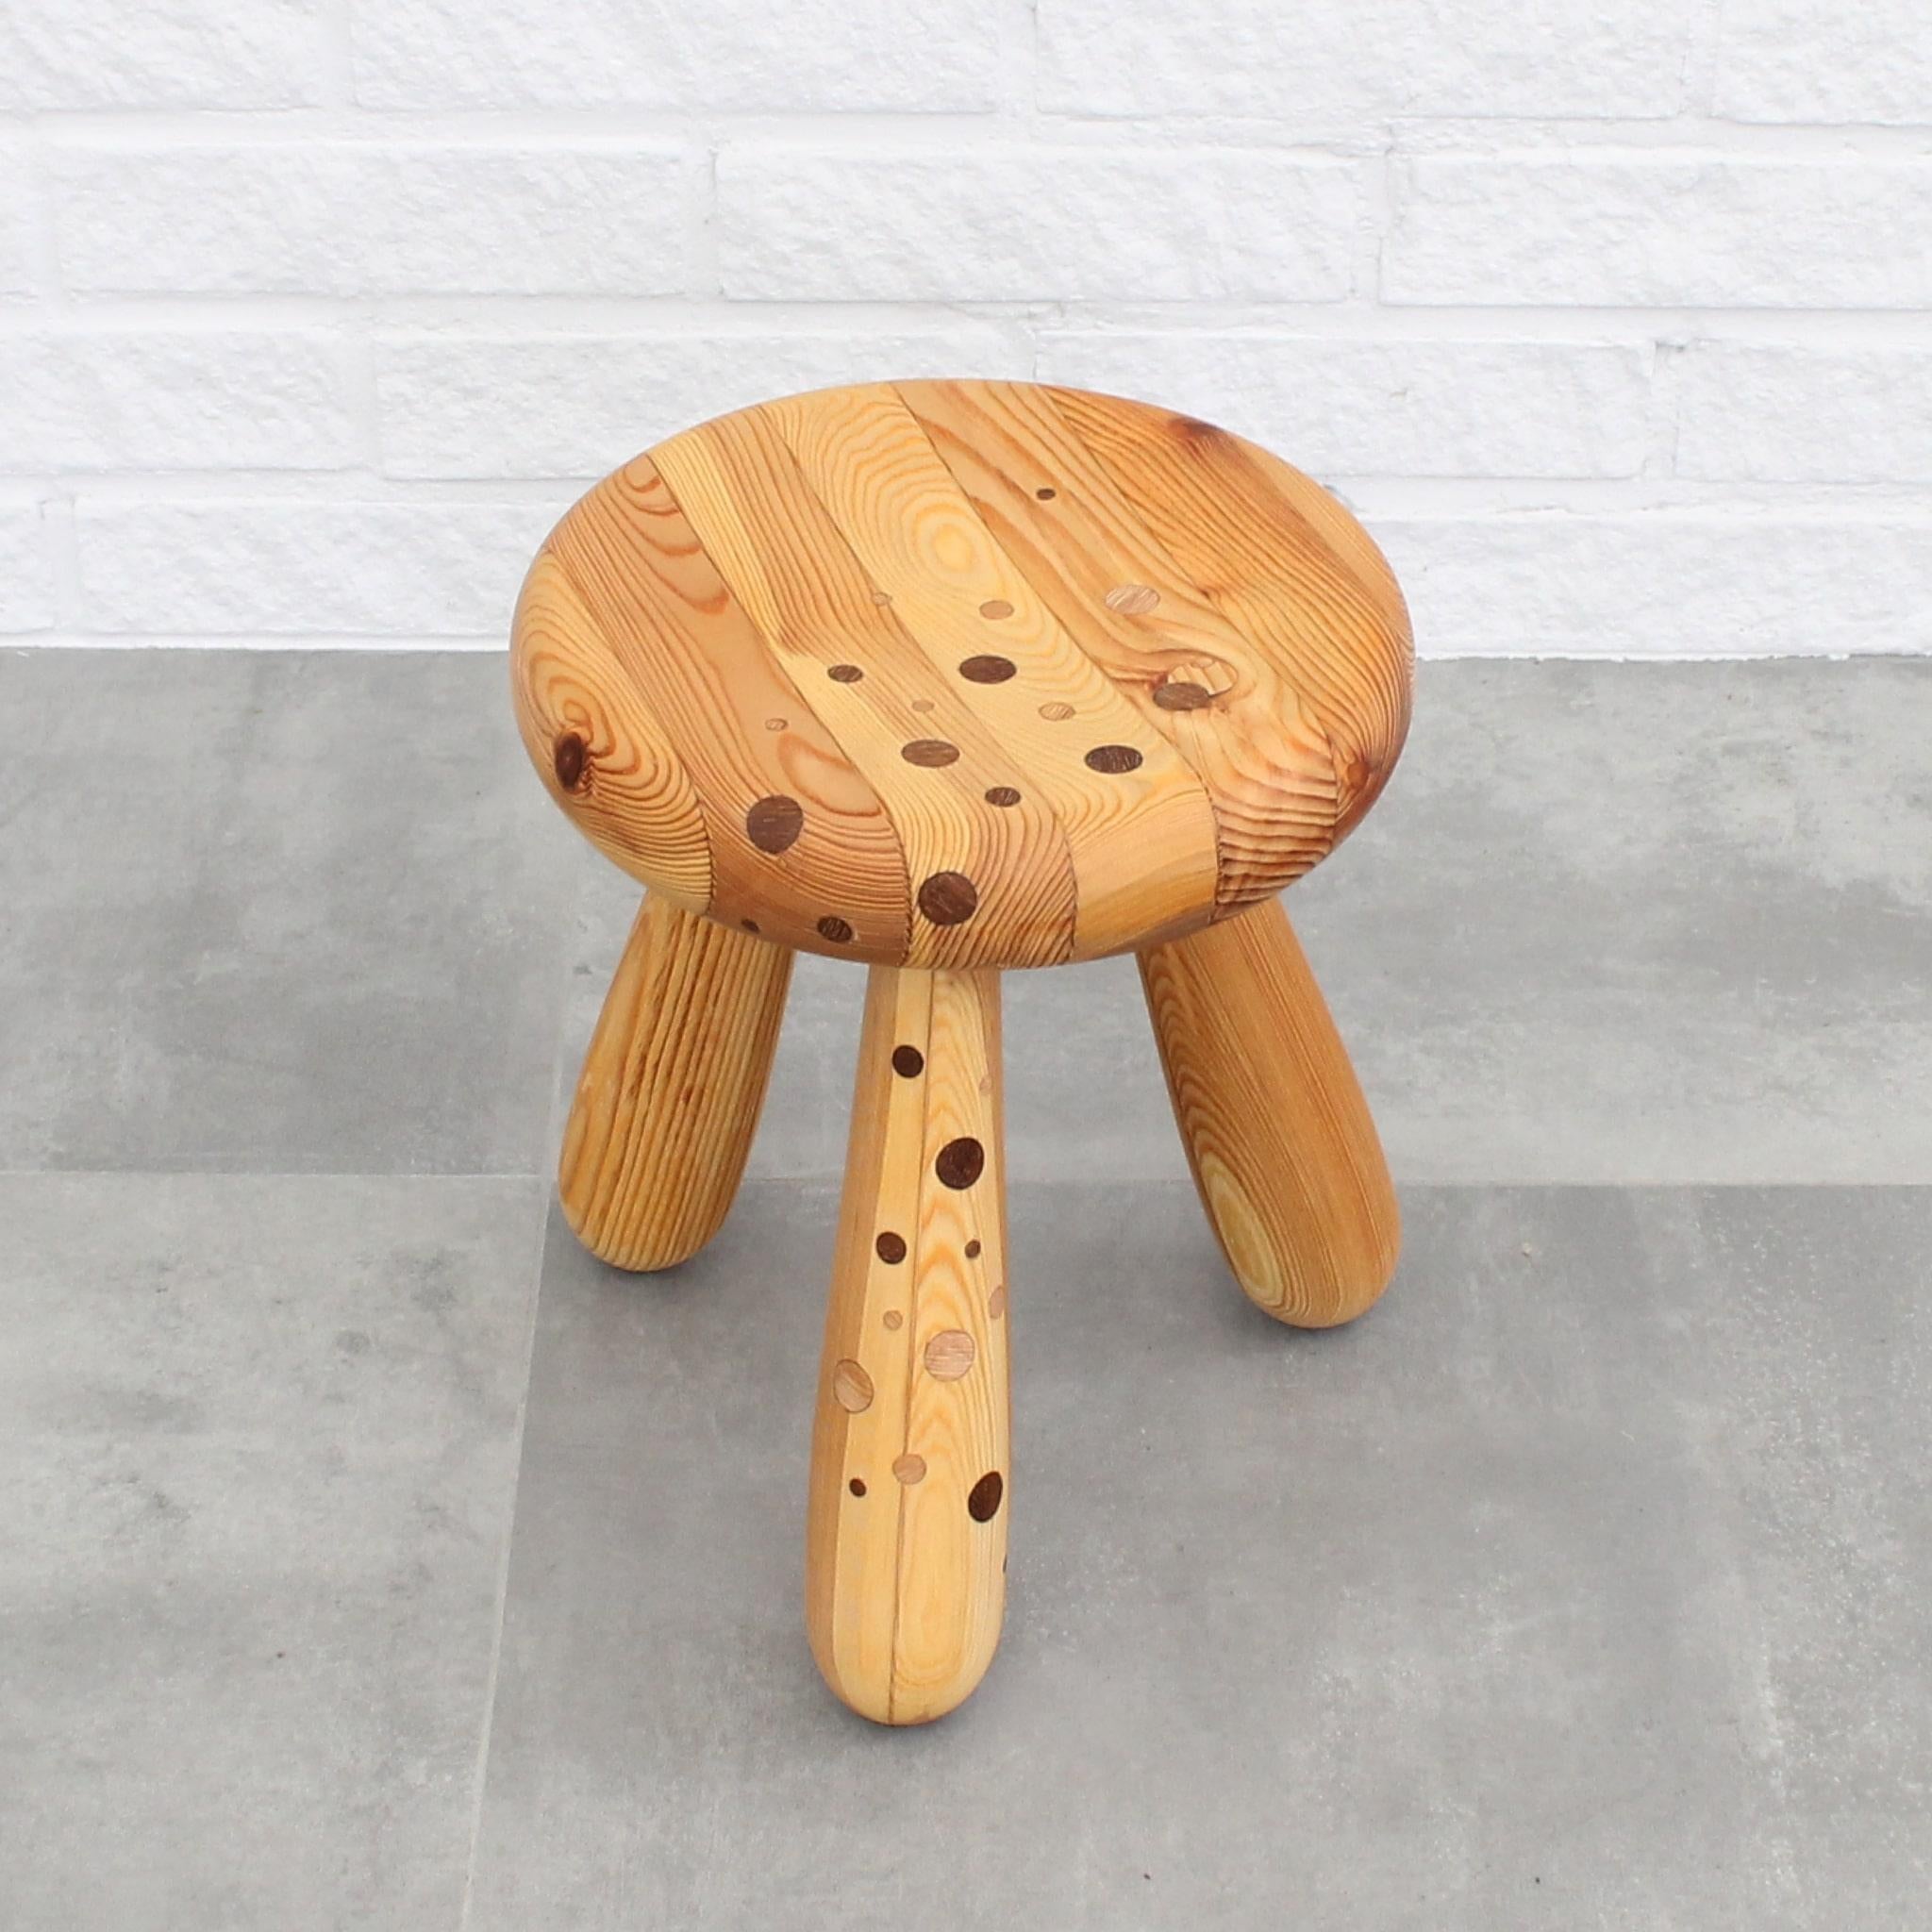 Scandinavian Modern Swedish milking stool in pine and teak by Andreas Zätterqvist For Sale